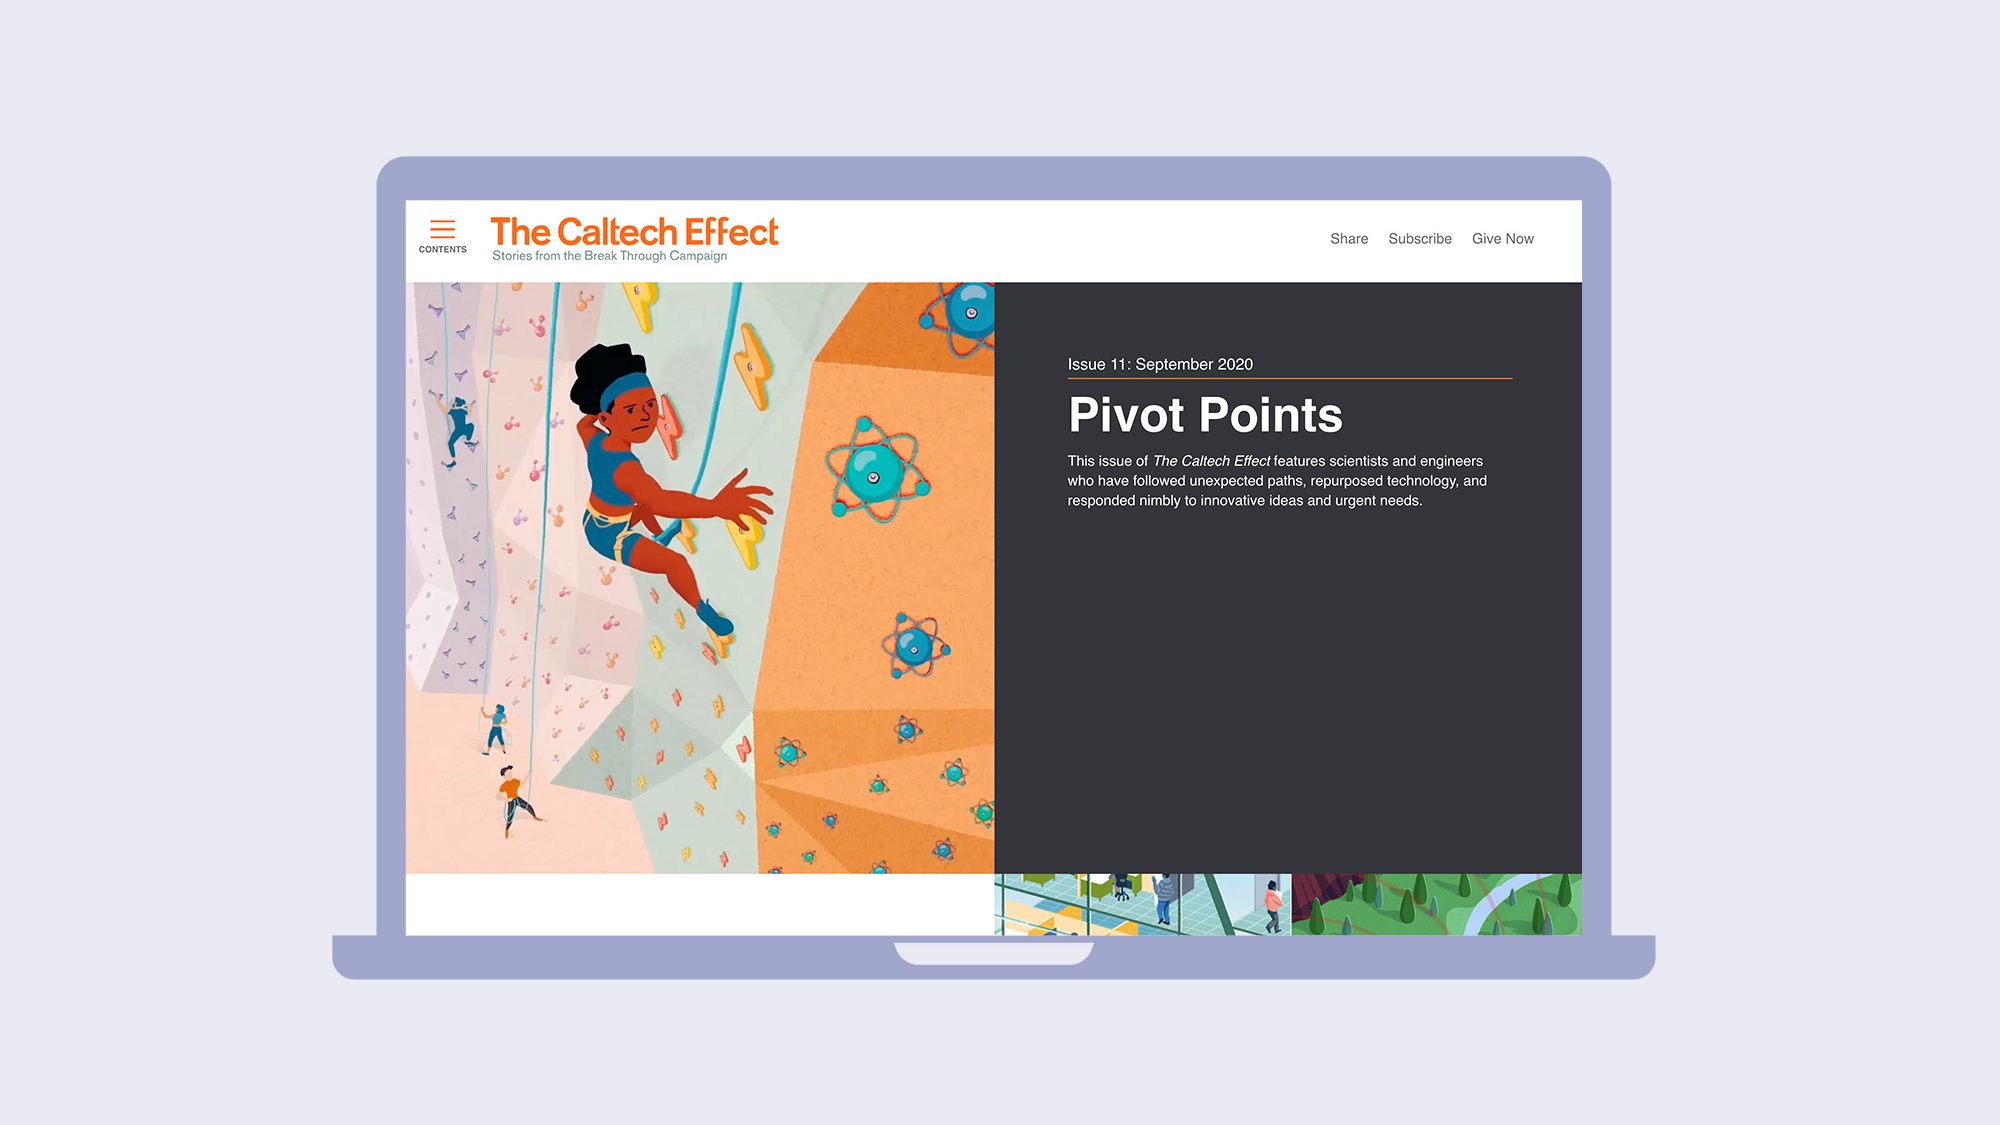 Website screenshot. Colorful illustration of someone wall climbing.